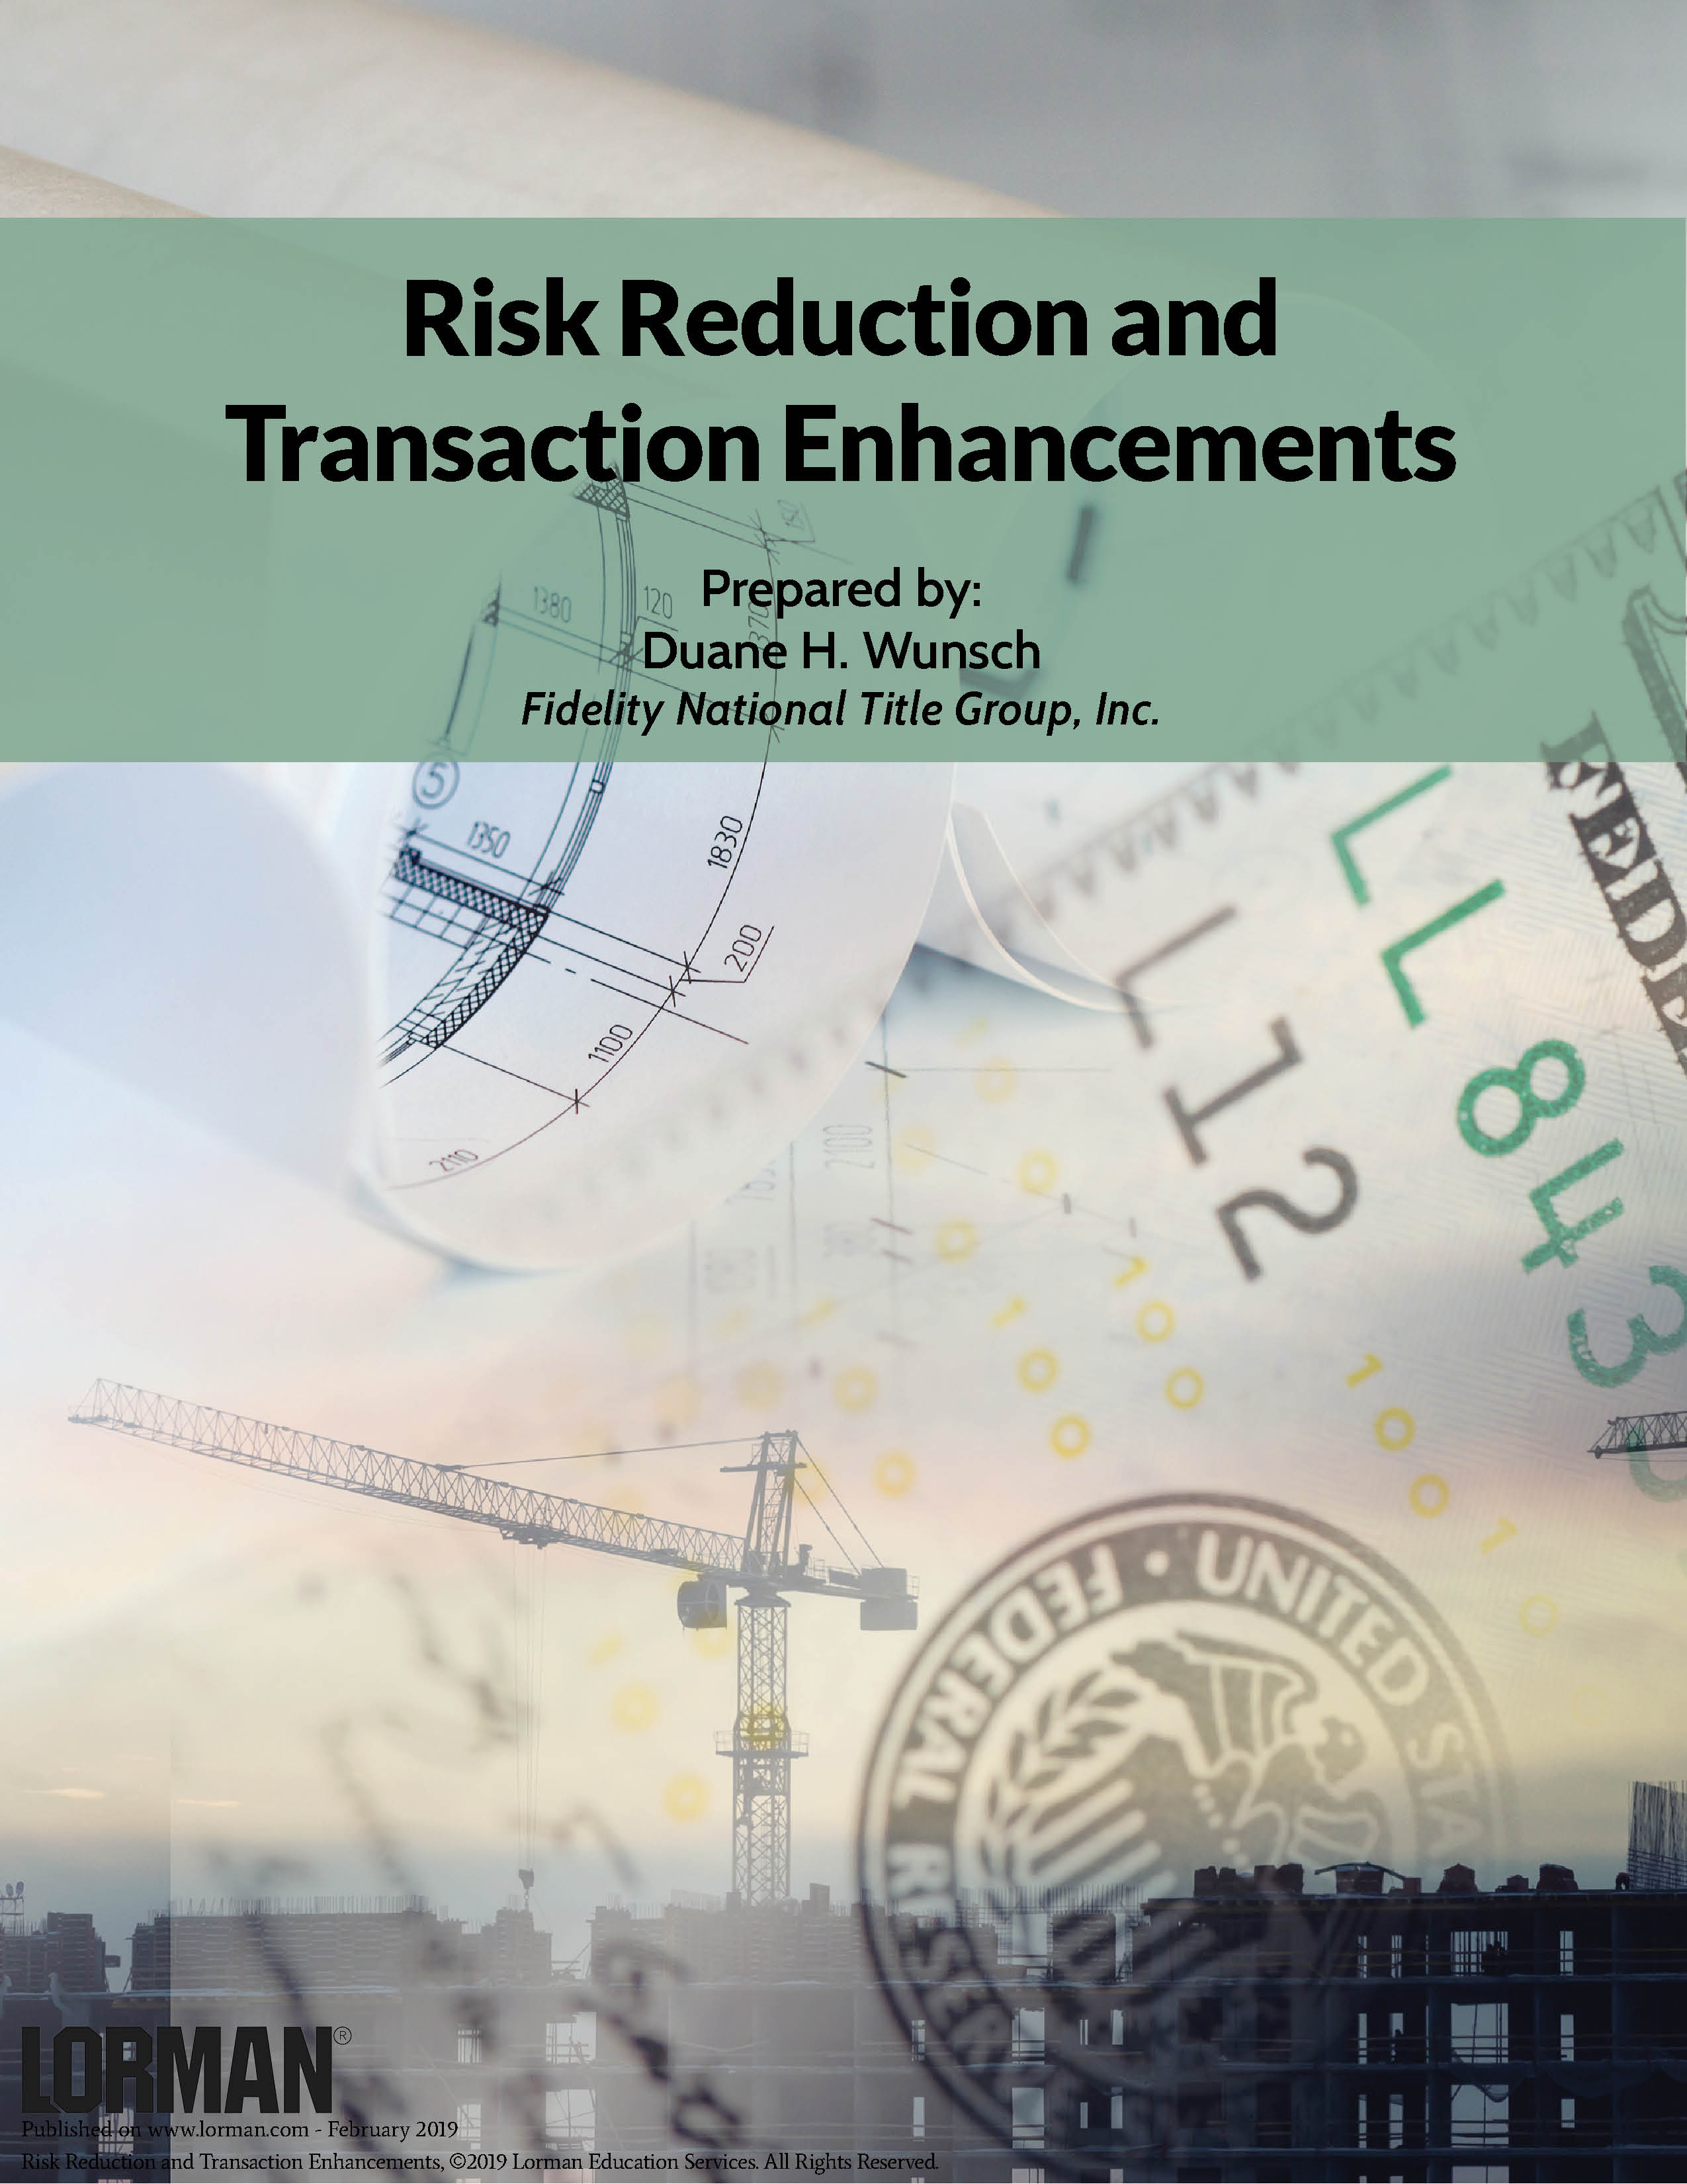 Risk Reduction and Transaction Enhancements